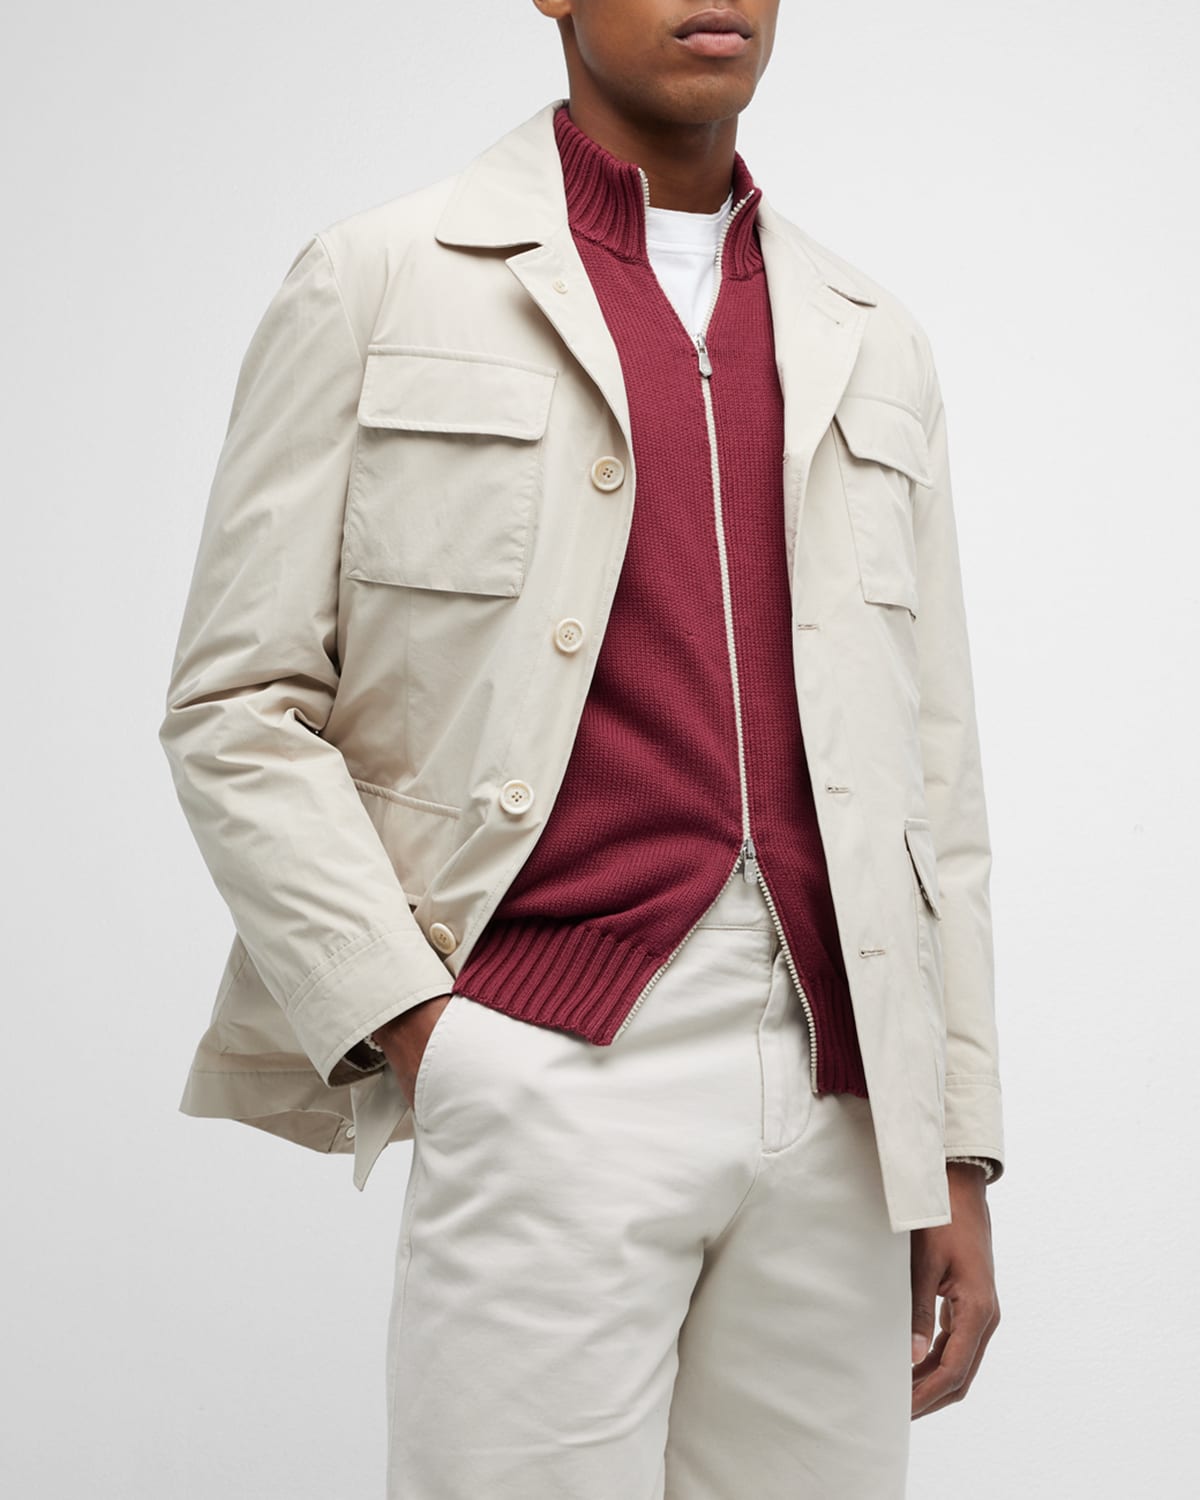 Men's Field Jacket with Removable Lining